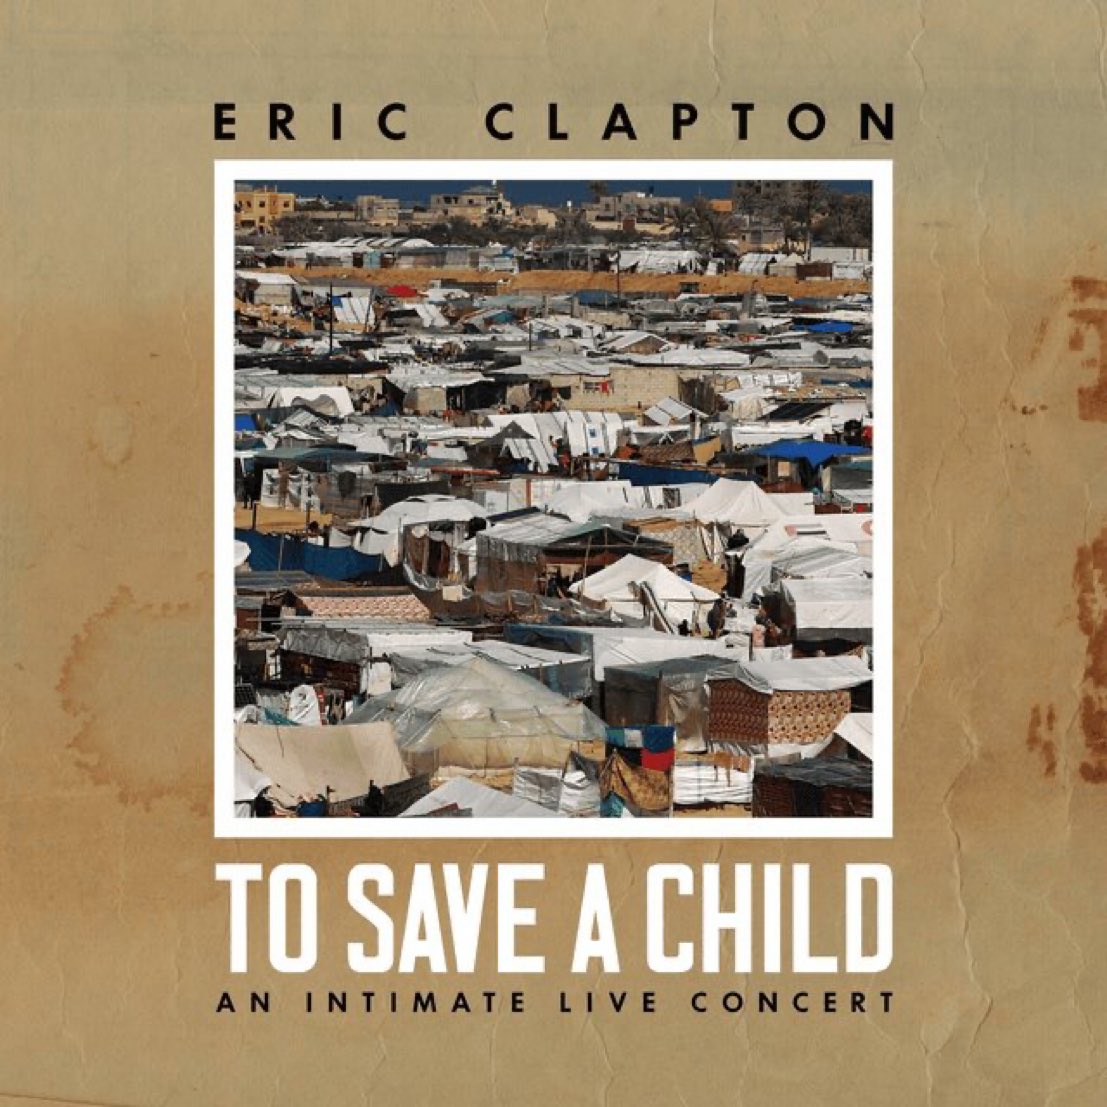 Eric Clapton “To Save a Child” Released digitally today. The proceeds will be donated in aid of the children in Gaza.